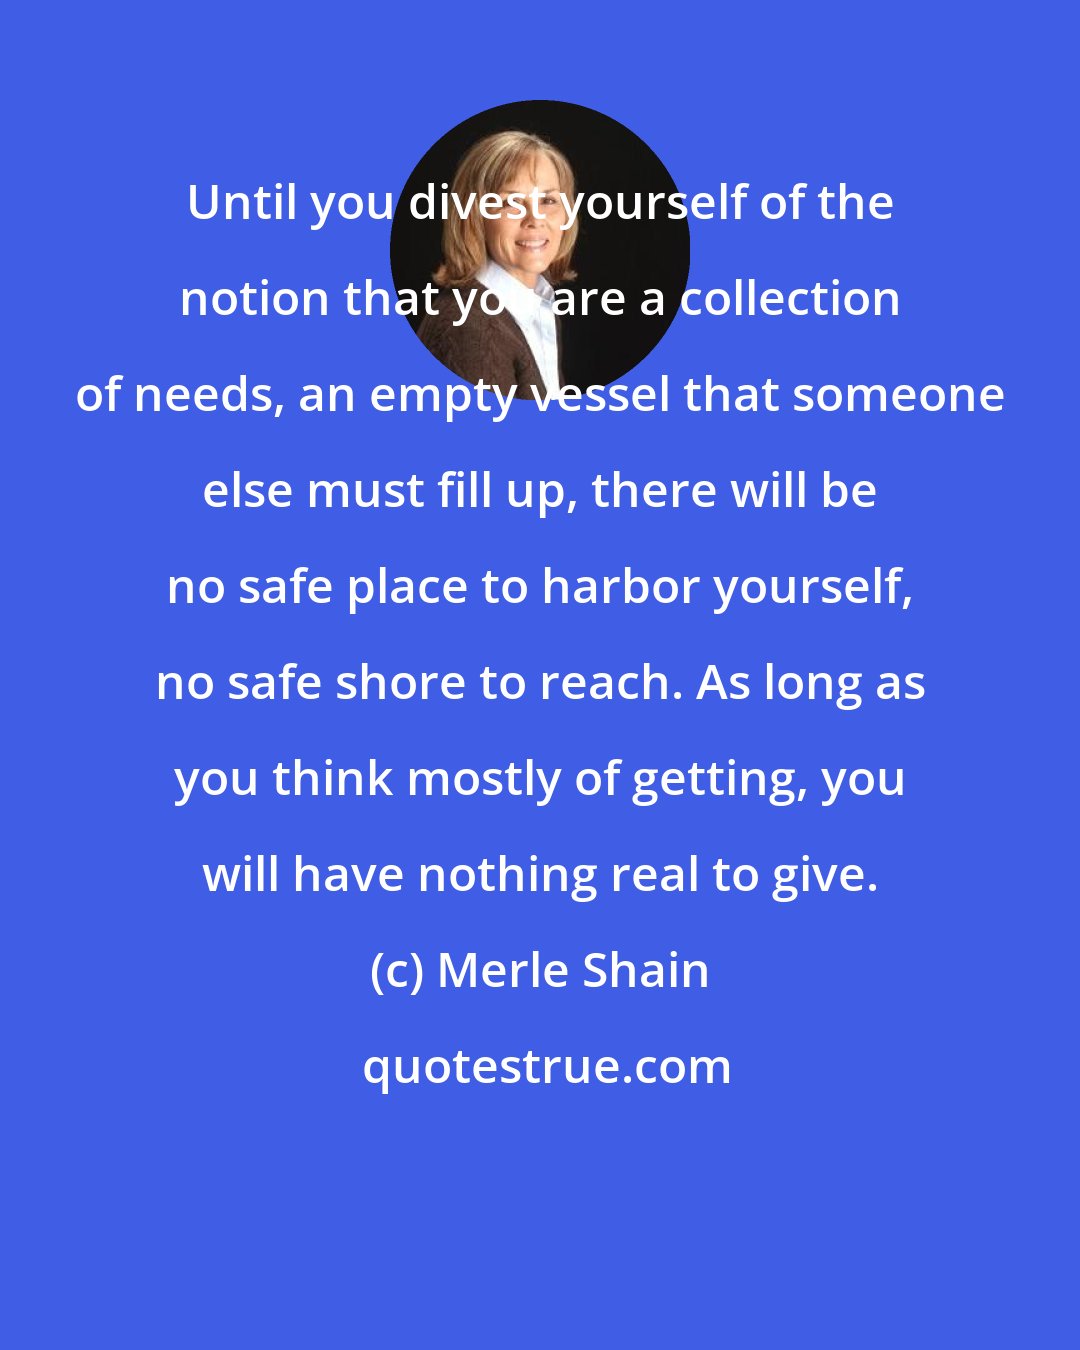 Merle Shain: Until you divest yourself of the notion that you are a collection of needs, an empty vessel that someone else must fill up, there will be no safe place to harbor yourself, no safe shore to reach. As long as you think mostly of getting, you will have nothing real to give.